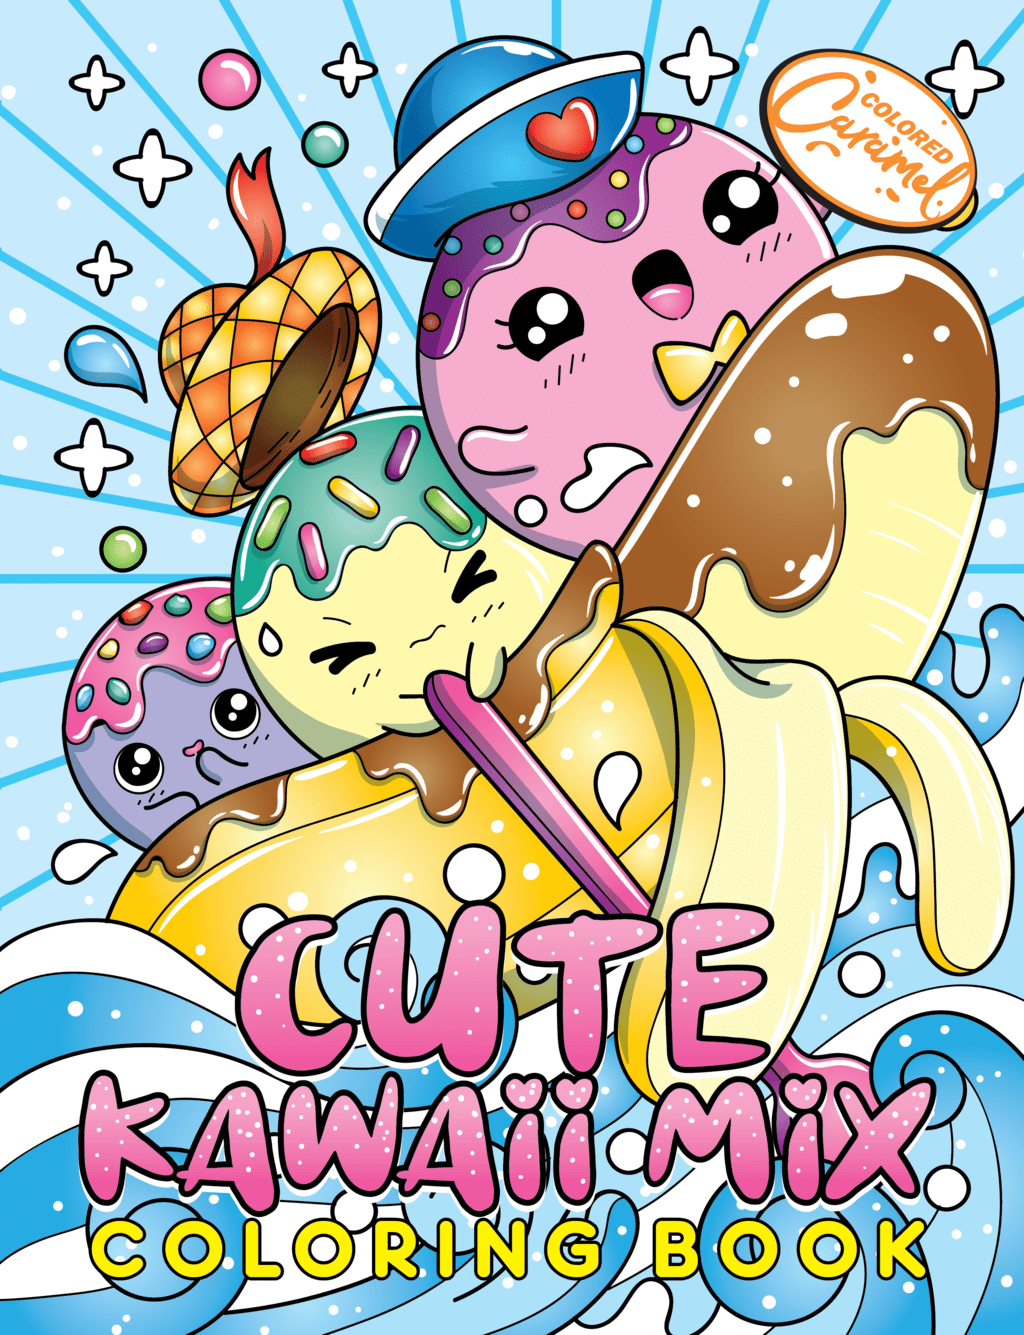 Free Cute Kawaii Mix! Join to download.